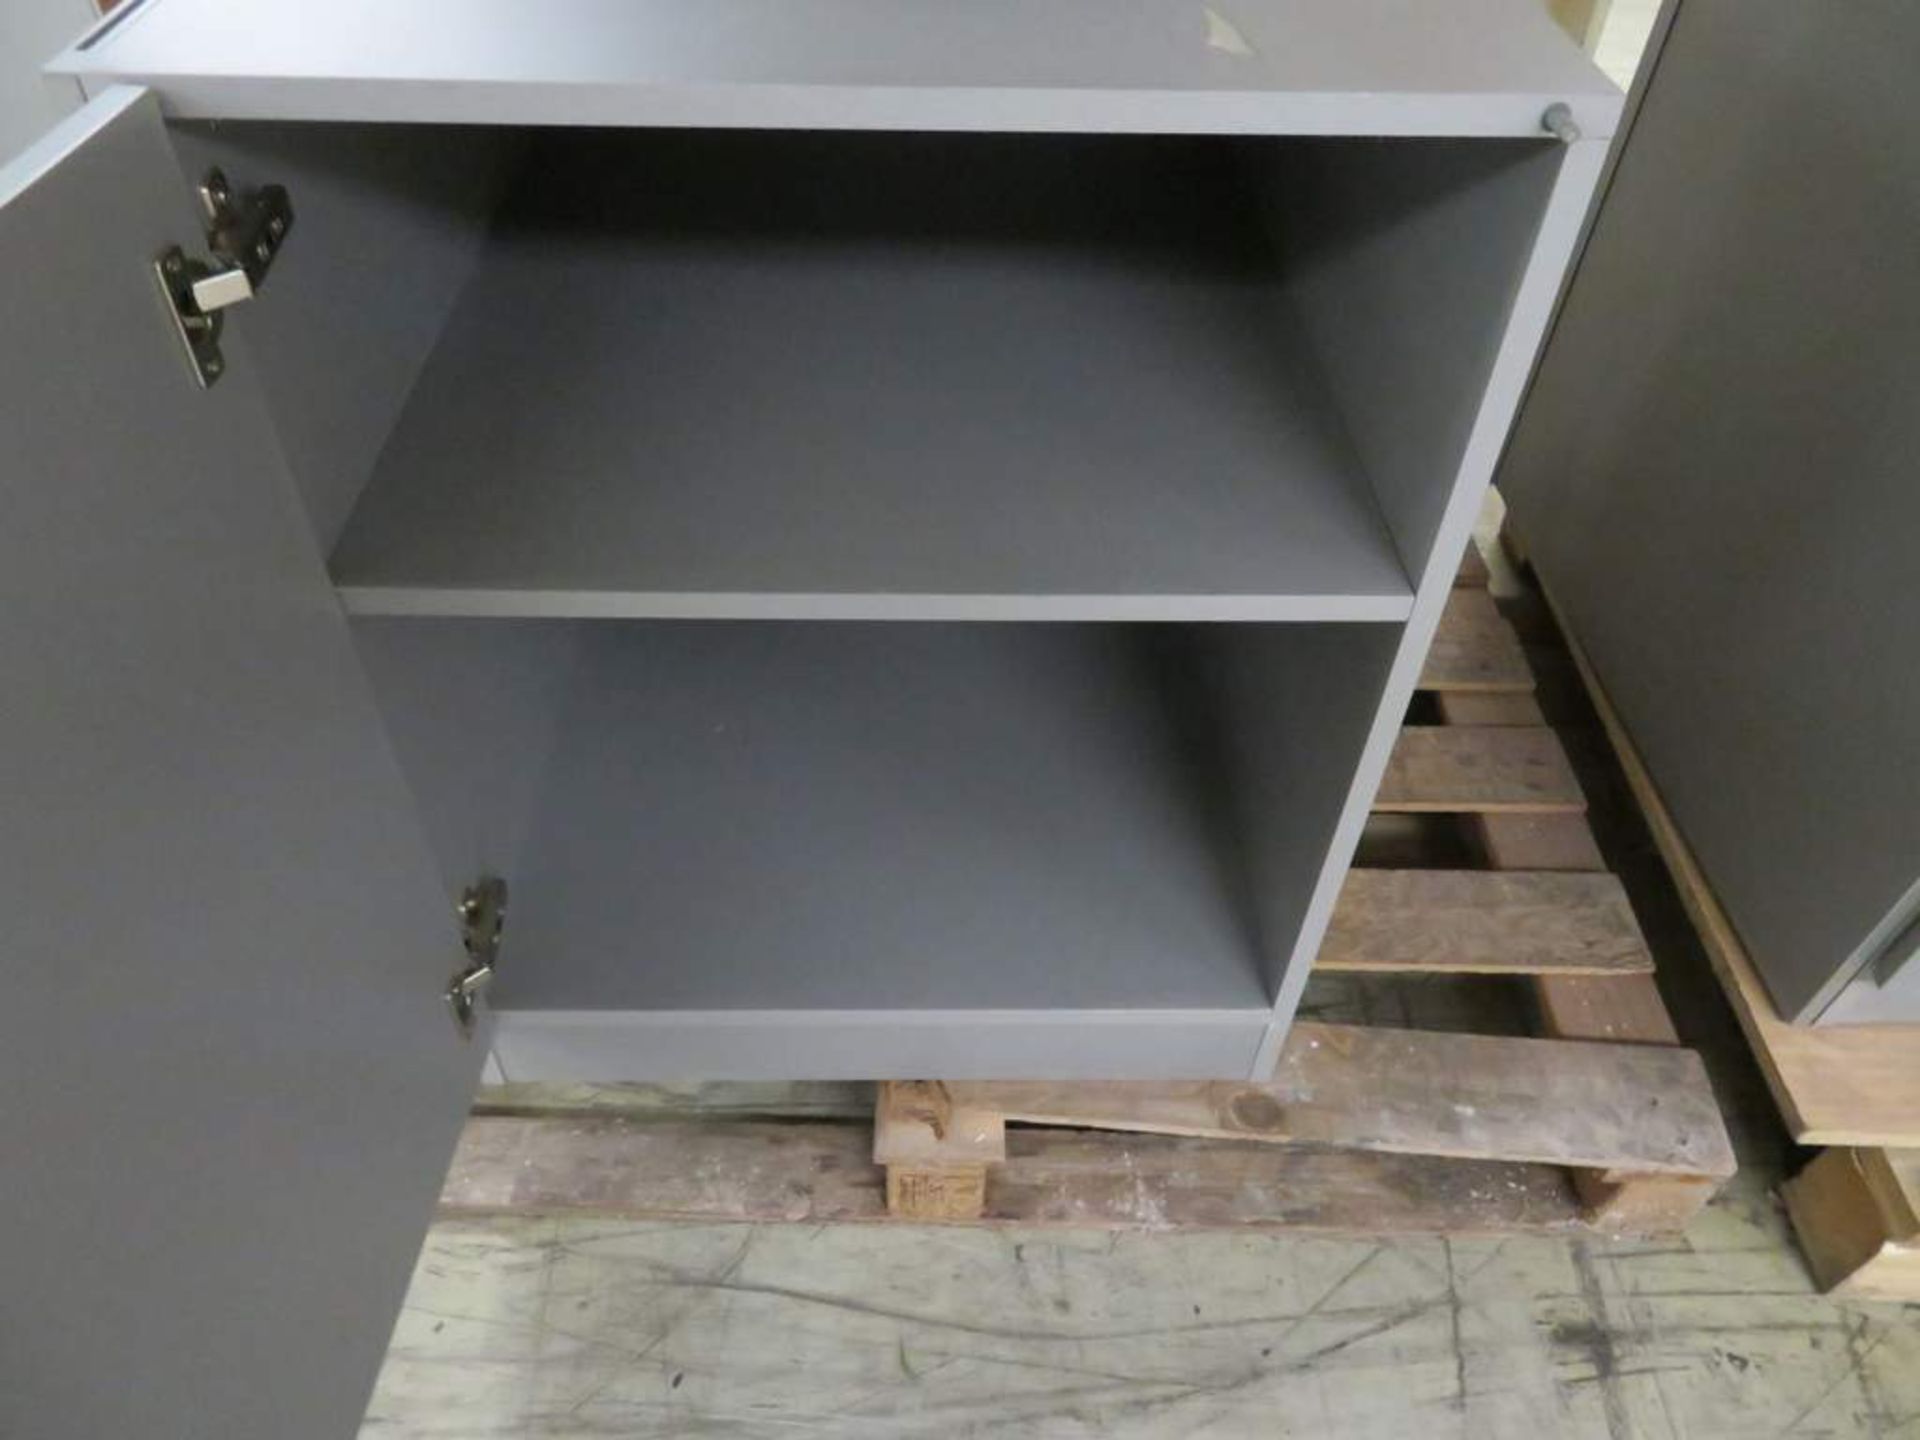 Product display cabinet with under counter cupboard - Image 4 of 4